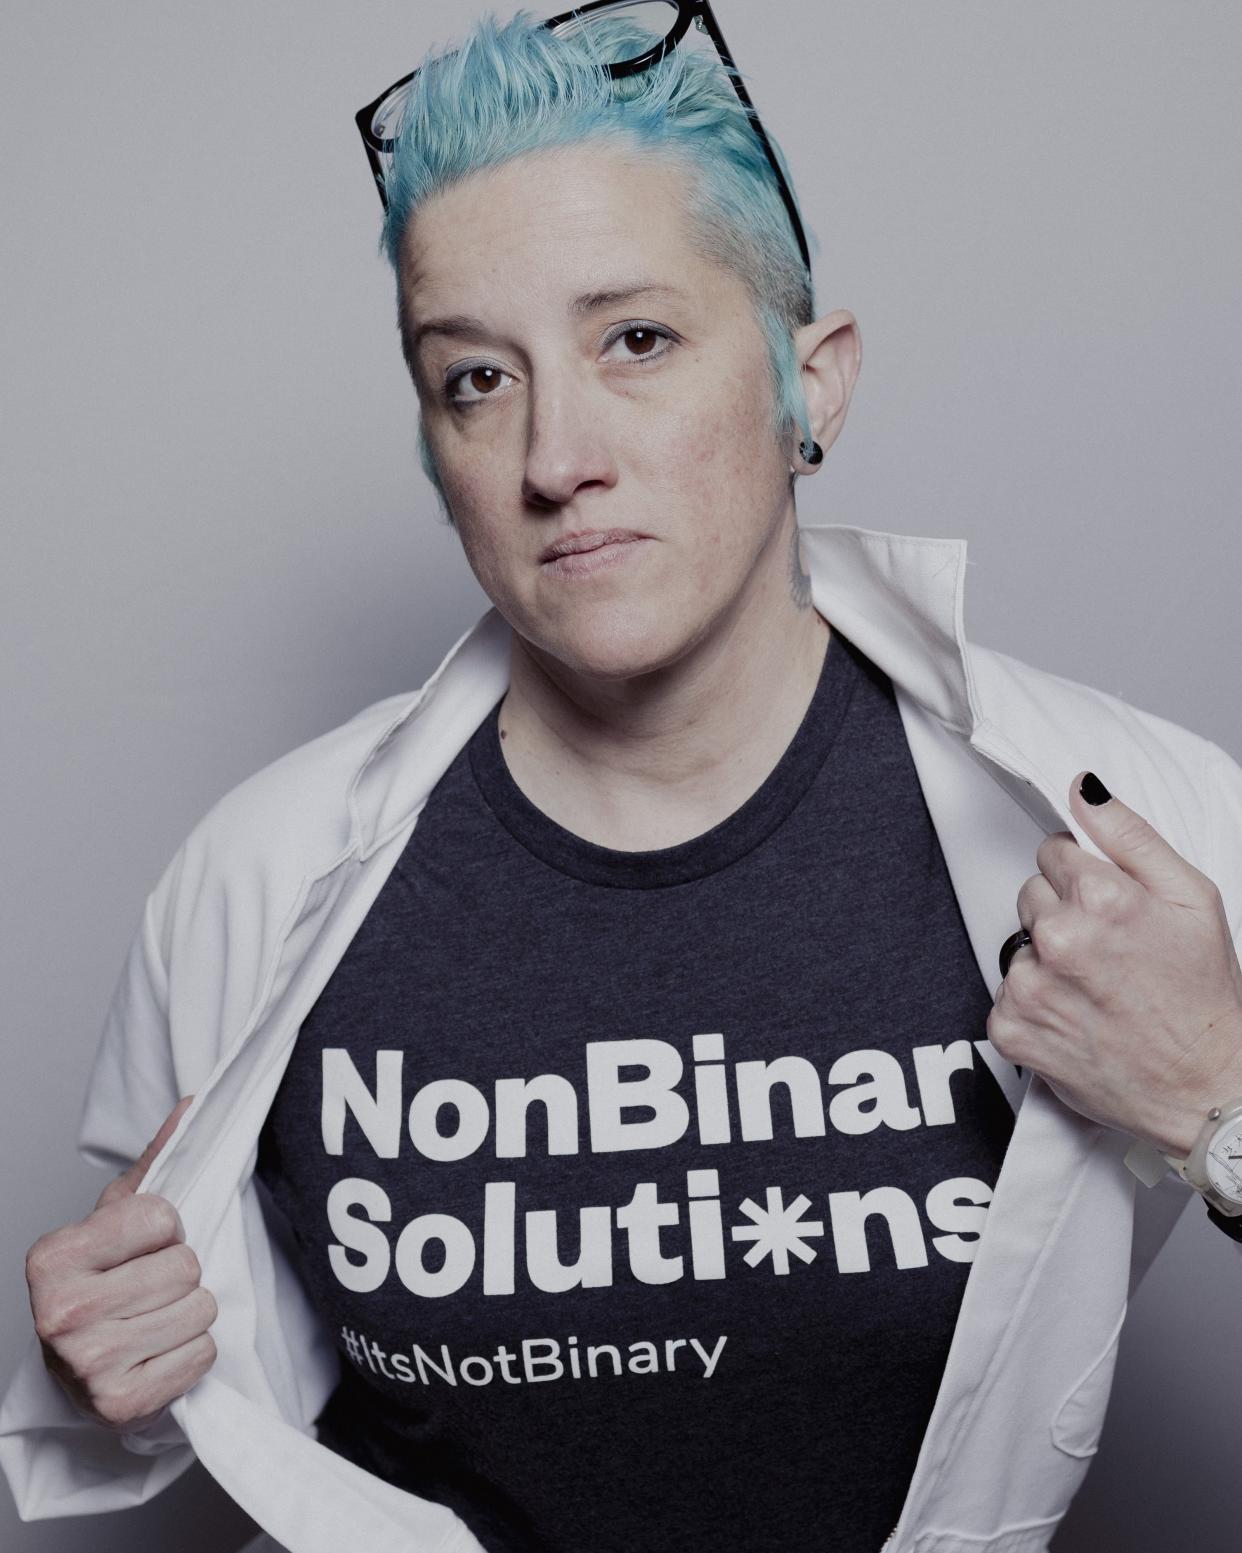 Amanda “Mandy” Ralston, a nonbinary activist, says the younger generation is embracing a plethora of new gender identities. (Courtesy Amanda Ralston) 